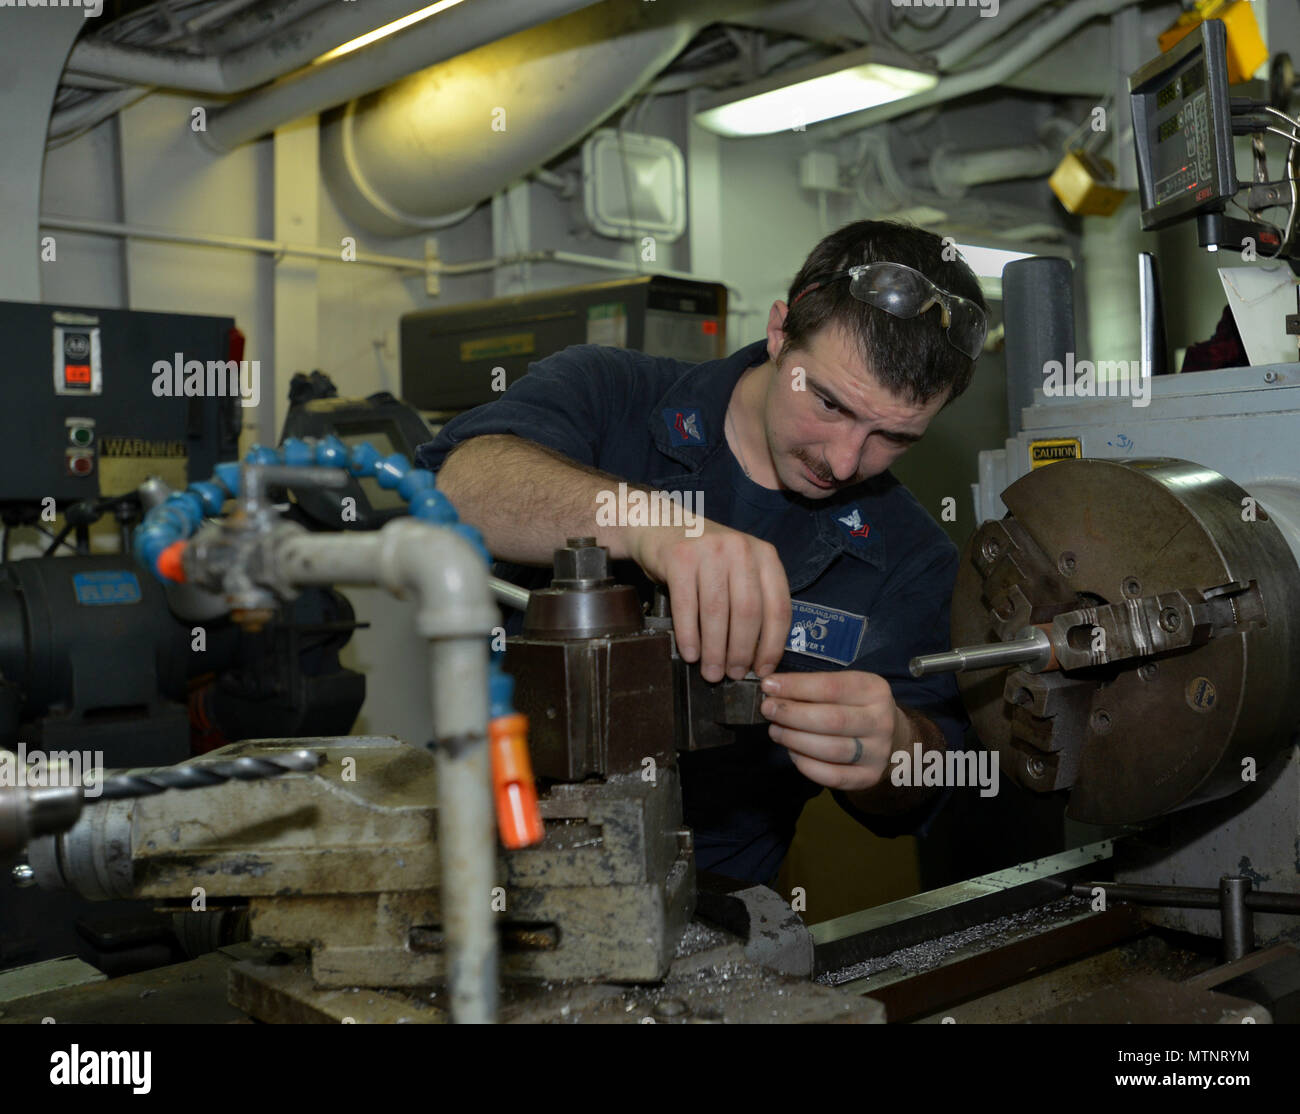 170113-N-HP188-033  ATLANTIC OCEAN (Jan. 13, 2017) – Machinery Repairman 2nd Class Tim Grover, a native of Hillsboro, Oregon, removes a bolt for cleaning from the cutter in the Machine Shop aboard the Wasp-class multipurpose amphibious assault ship USS Bataan (LHD 5). Bataan is underway conducting Composite Training Unit Exercise (COMPTUEX) with the Bataan Amphibious Ready Group in preparation for an upcoming deployment.  (U.S. Navy photo by Mass Communication Specialist 3rd Class Mutis A. Capizzi/Released) Stock Photo